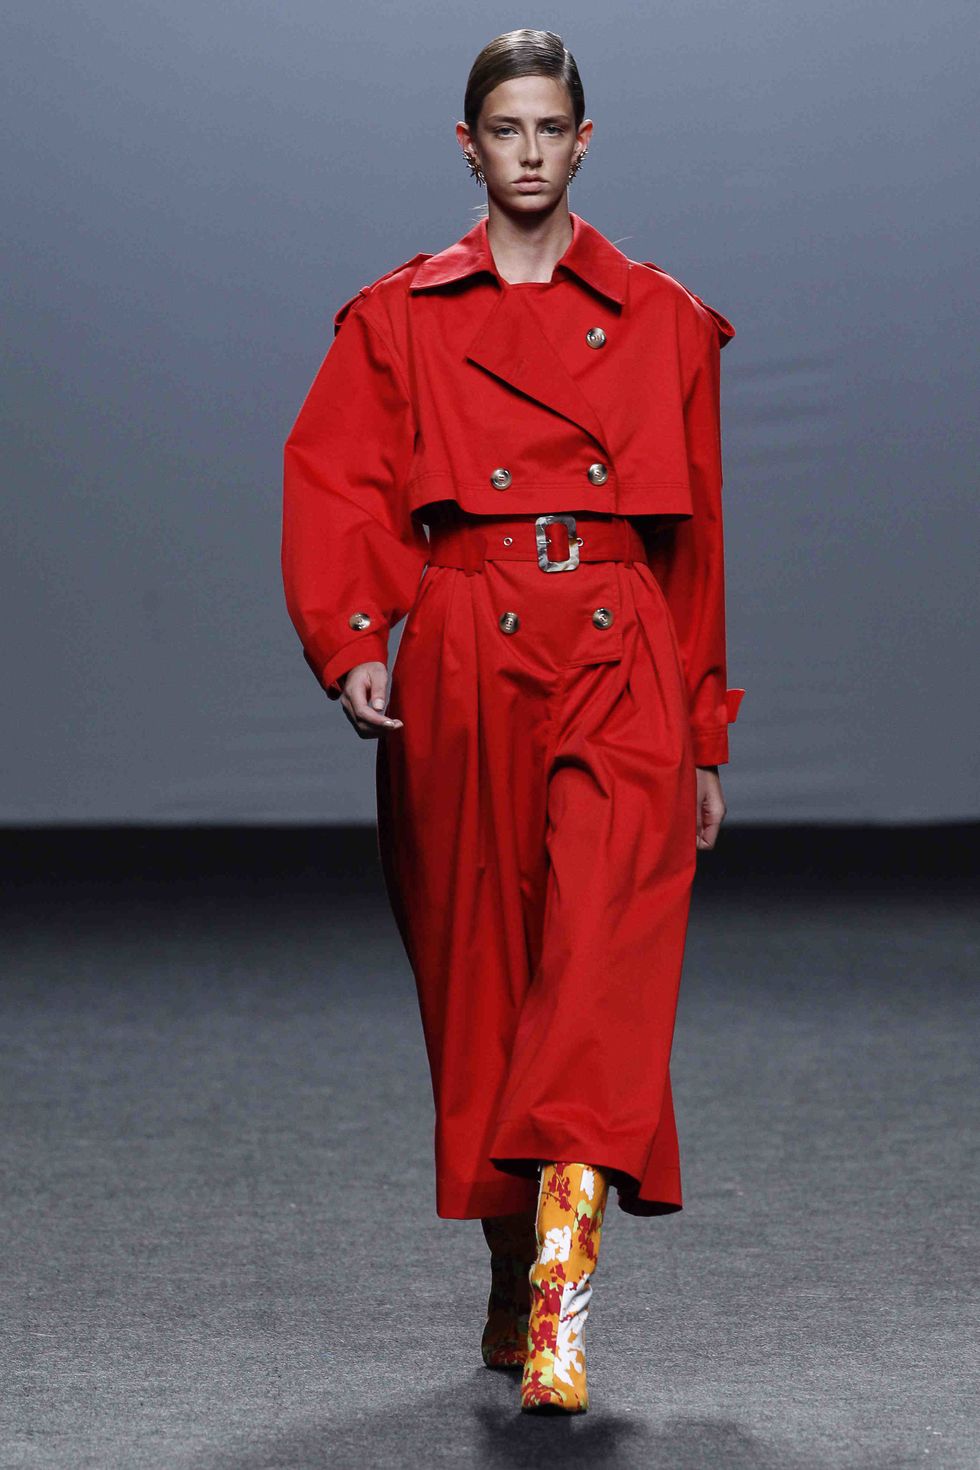 Fashion model, Clothing, Fashion, Runway, Red, Fashion show, Trench coat, Coat, Overcoat, Outerwear, 